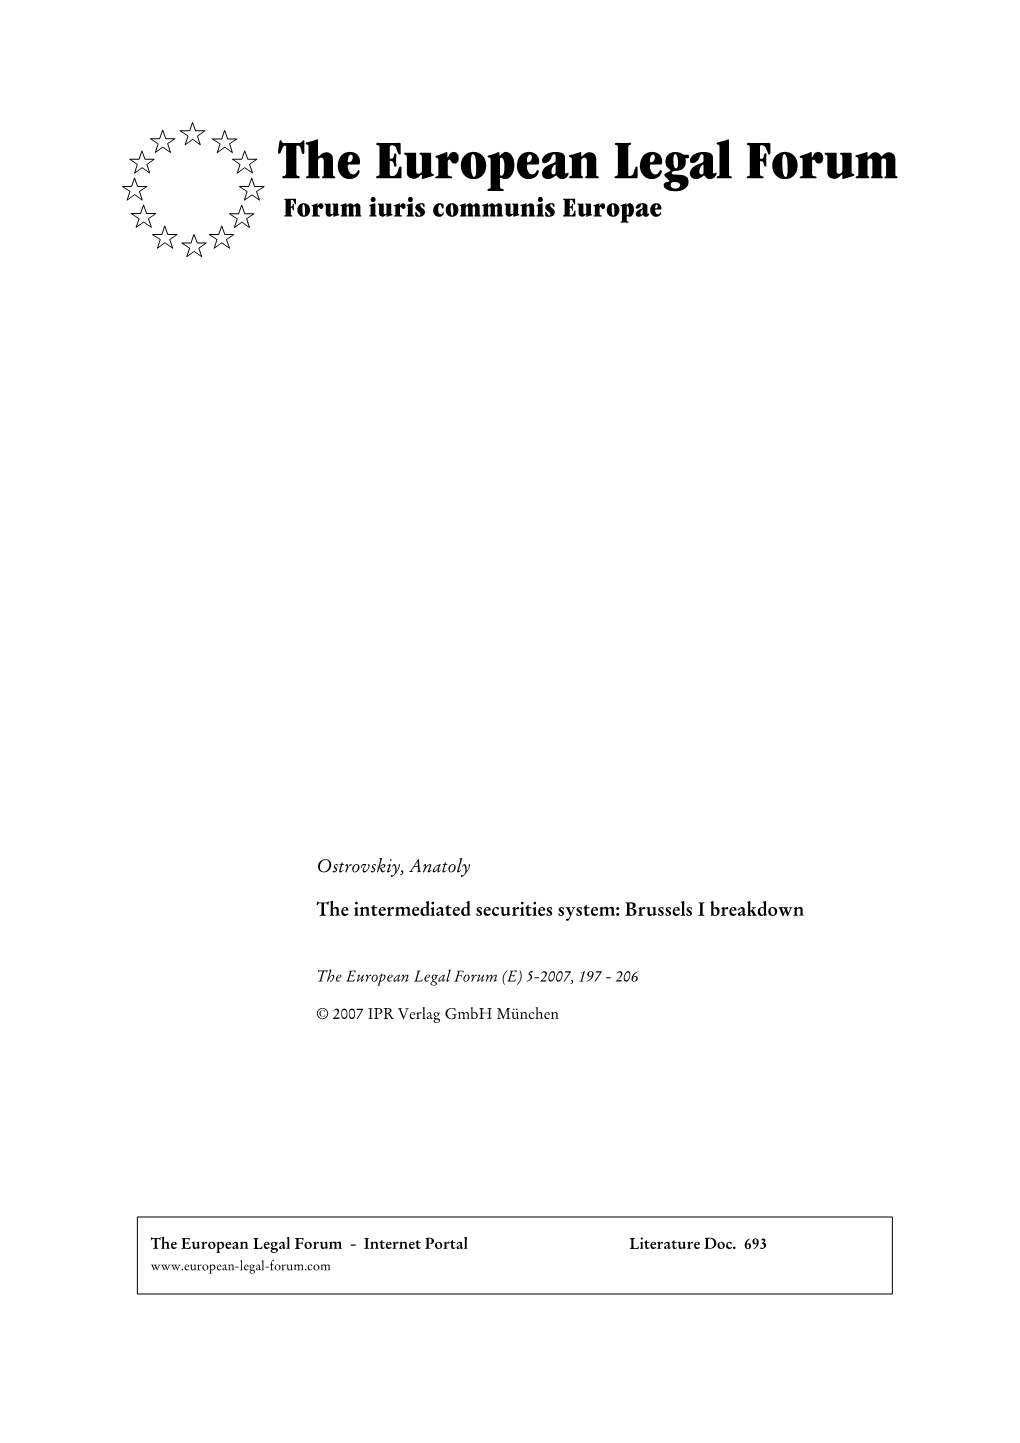 The Intermediated Securities System: Brussels I Breakdown